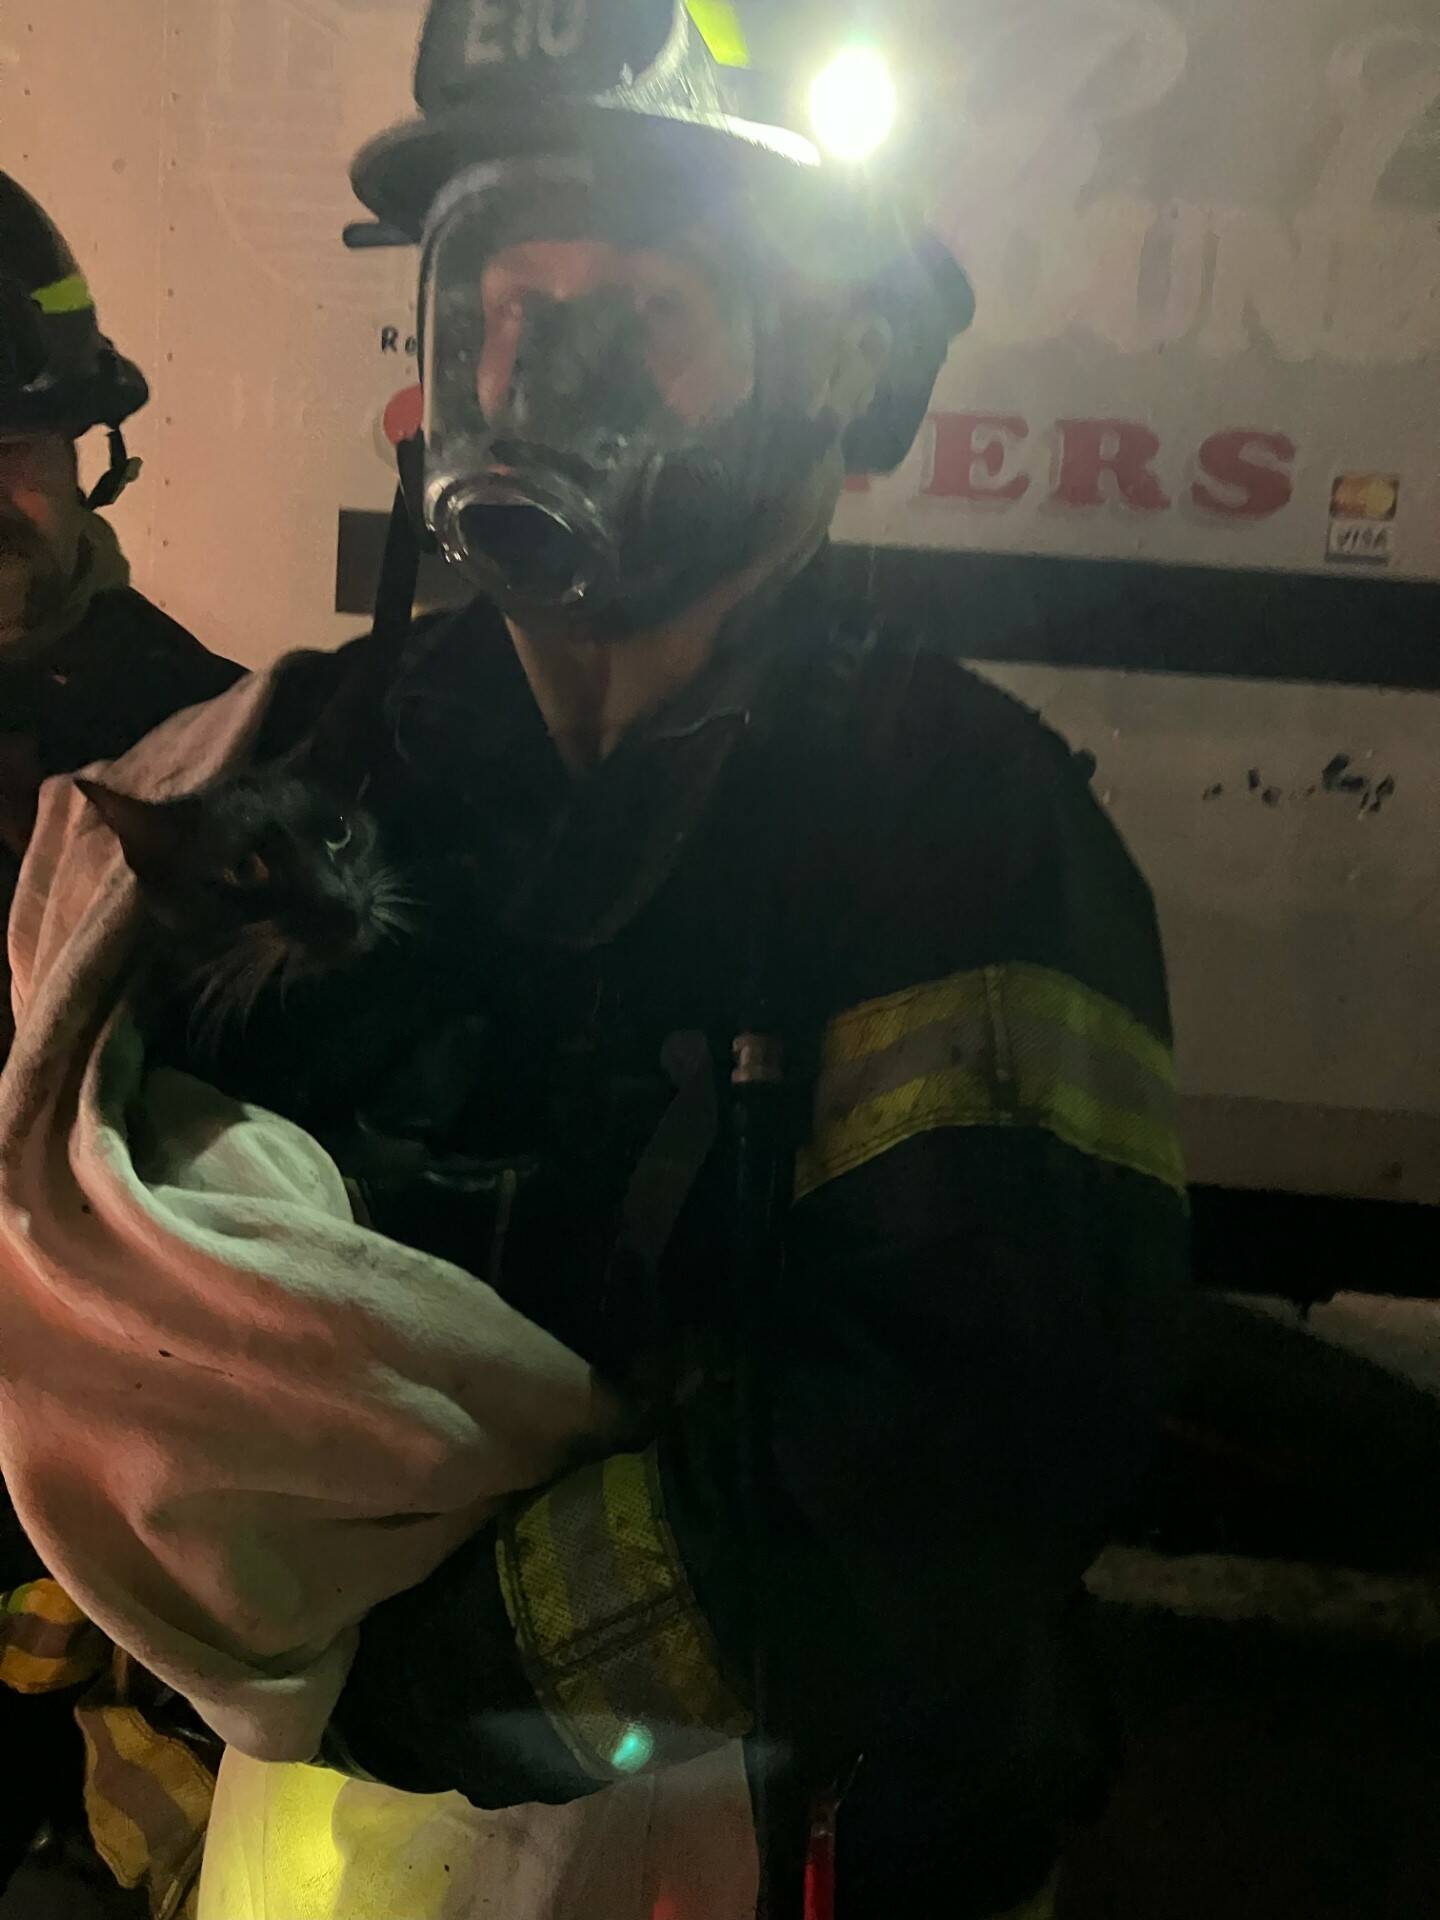 Aberdeen firefighter Alex Bartlett carries a cat rescued from the apartment building fire during a call on May 16. (Courtesy photo / Aberdeen Fire Department)